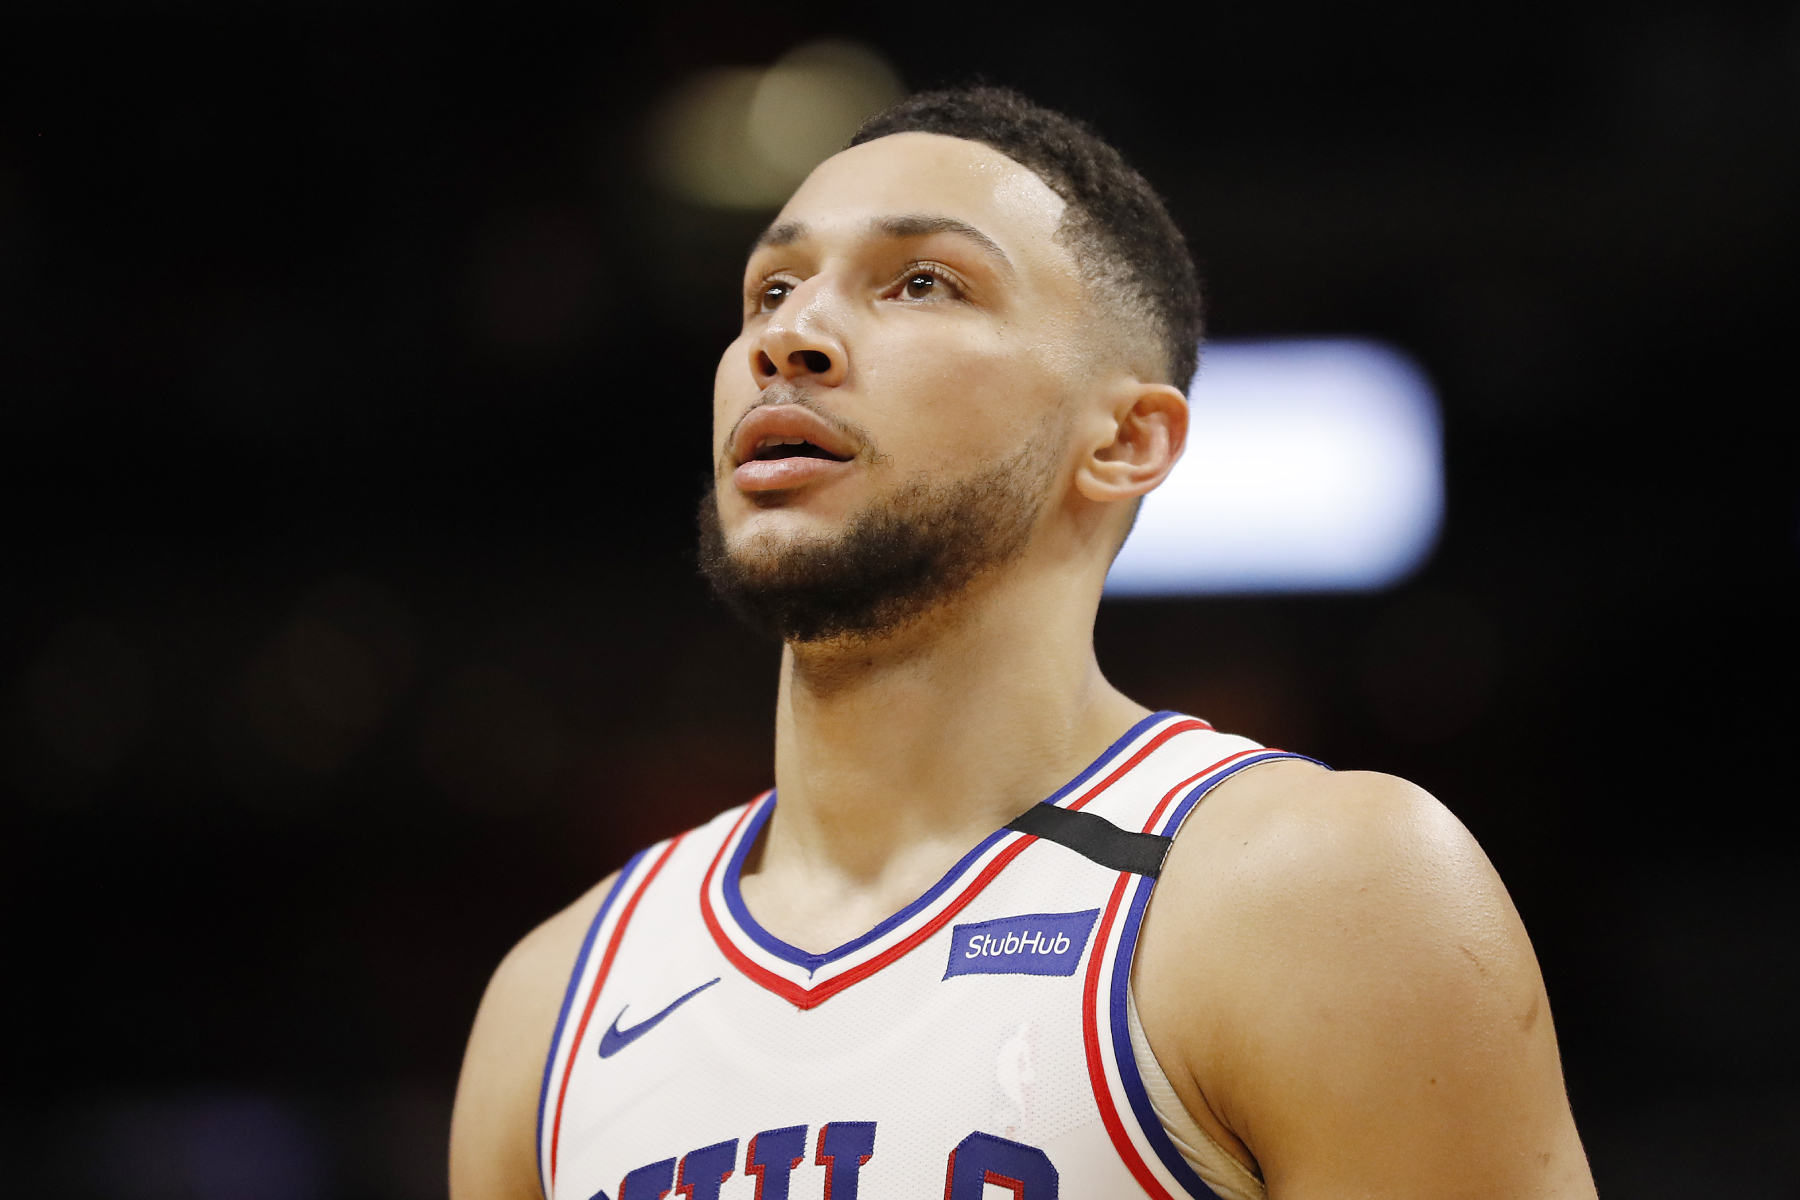 Ben Simmons has been great, but also disappointing, at times for the Philadelphia 76ers. Could he actually be getting replaced?